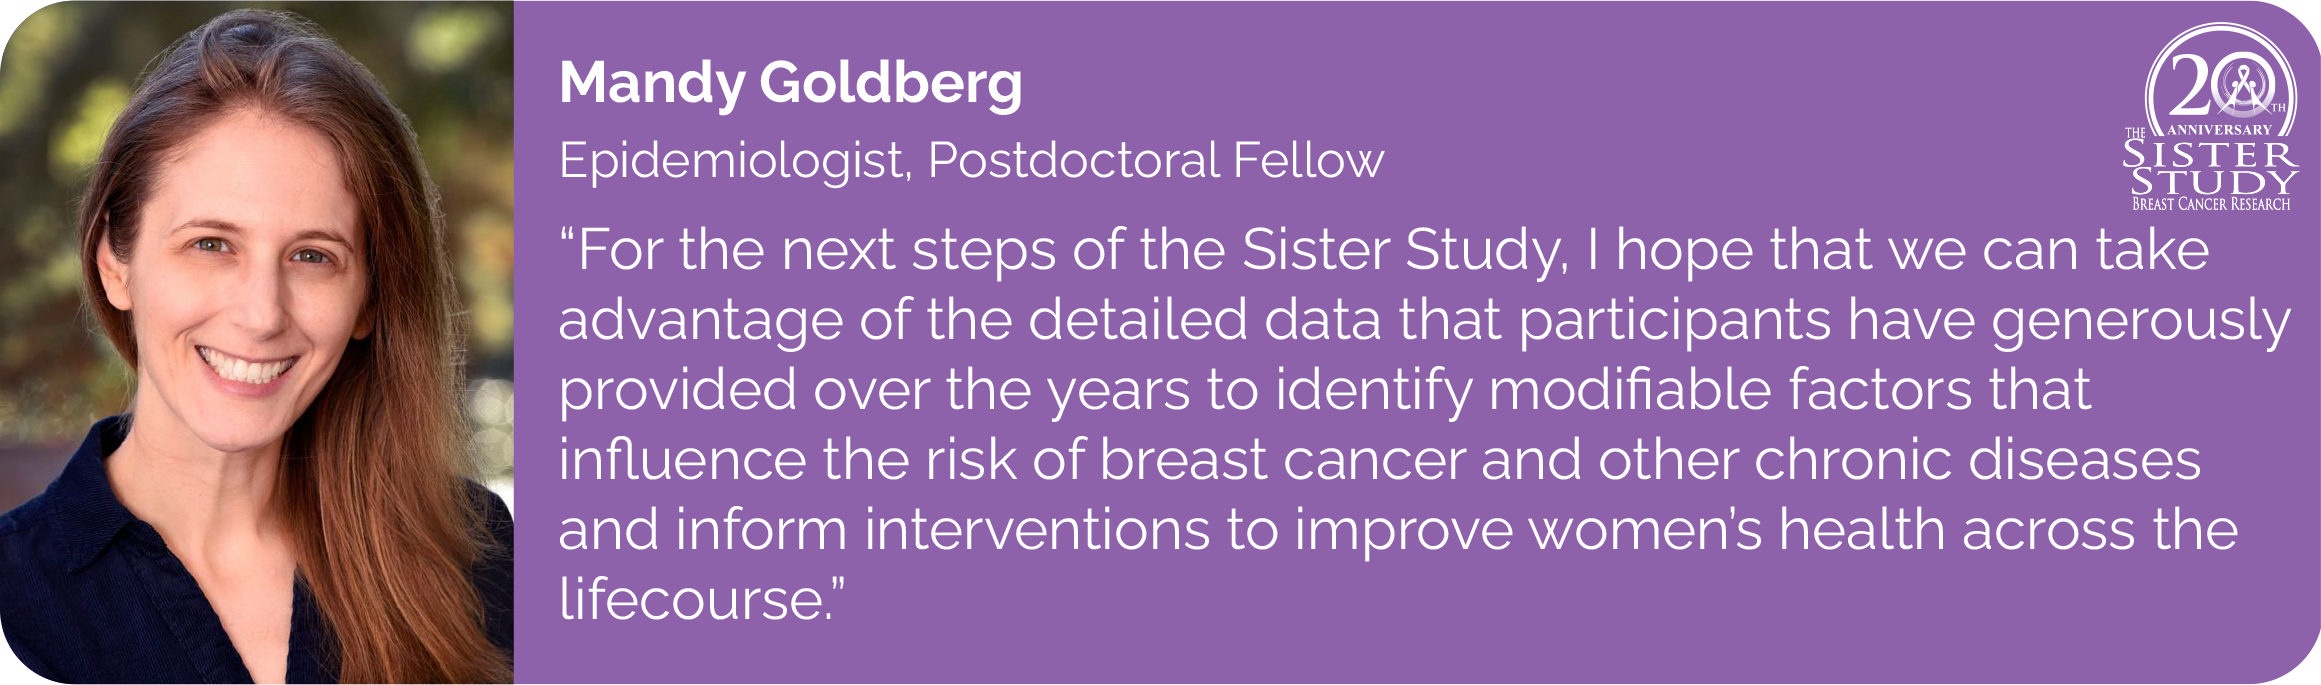 Mandy Goldberg
Epidemiologist, Postdoctoral Fellow
- For the next steps of the Sister Study, I hope that we can take
advantage of the detailed data that participants have generously
provided over the years to identify modifiable factors that influence the risk of breast cancer and other chronic diseases and inform interventions to improve womens health across the
lifecourse.